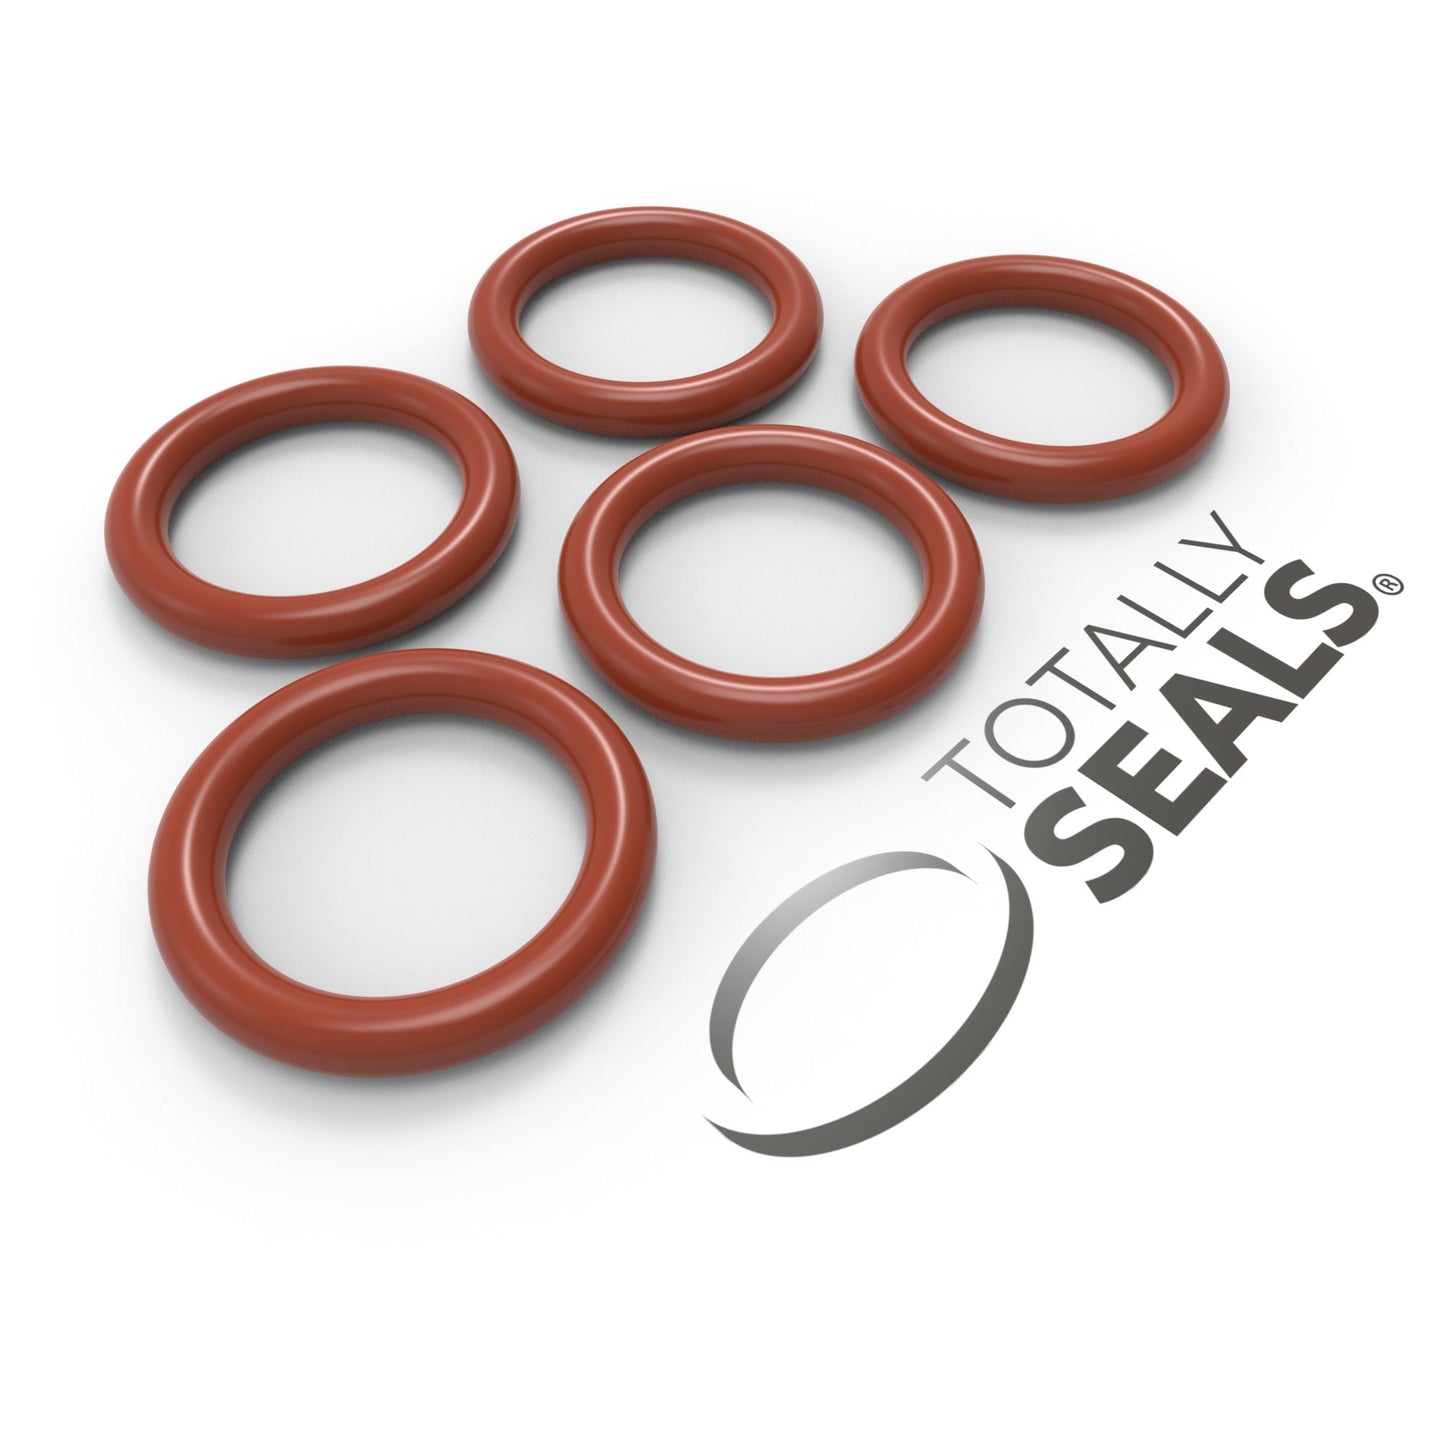 25mm x 2.5mm (30mm OD) Silicone O-Rings - Totally Seals®